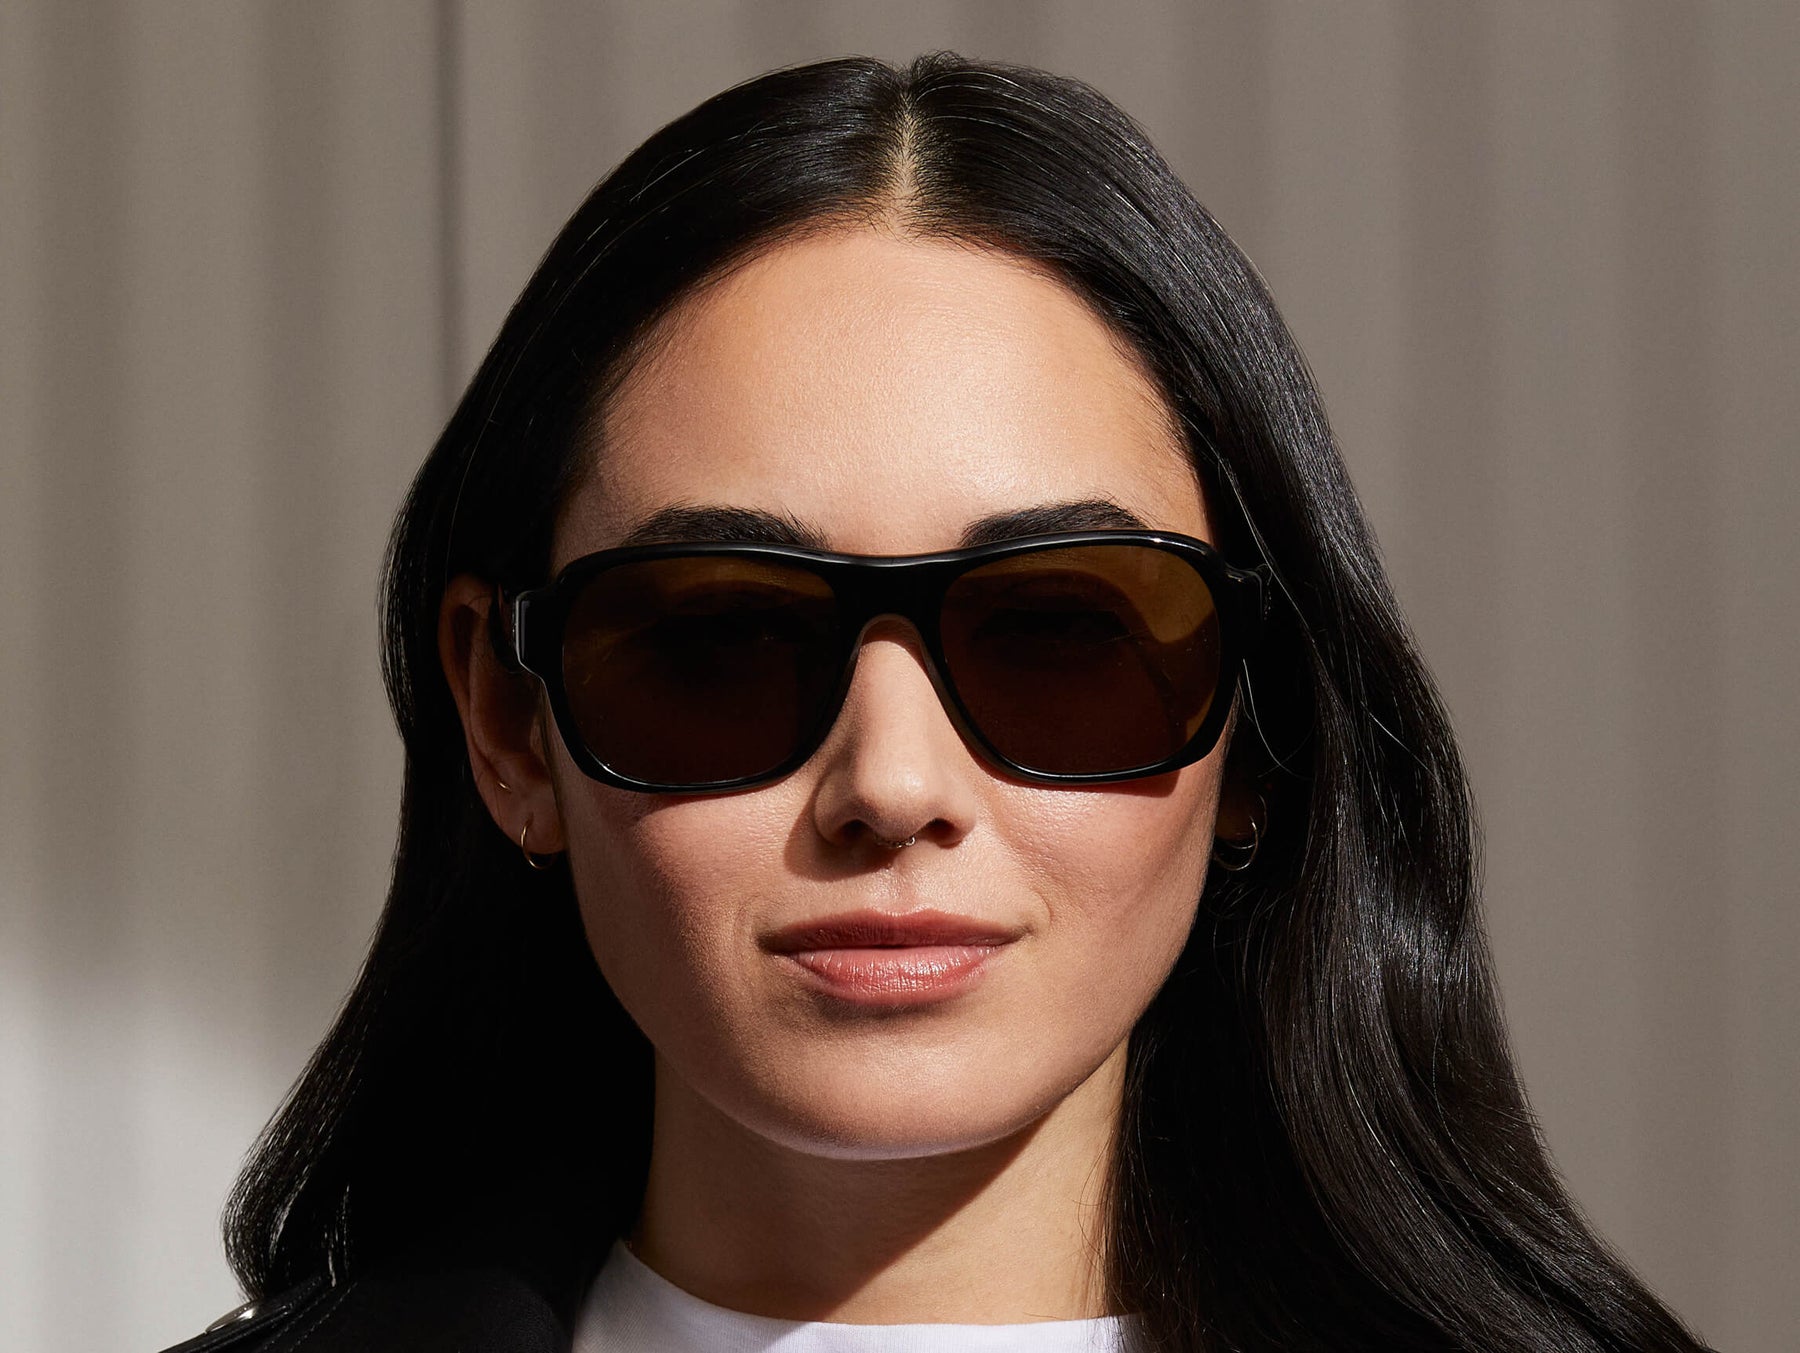 Model is wearing The SHVITZ SUN in Black in size 57 with CR-39 Green Lenses